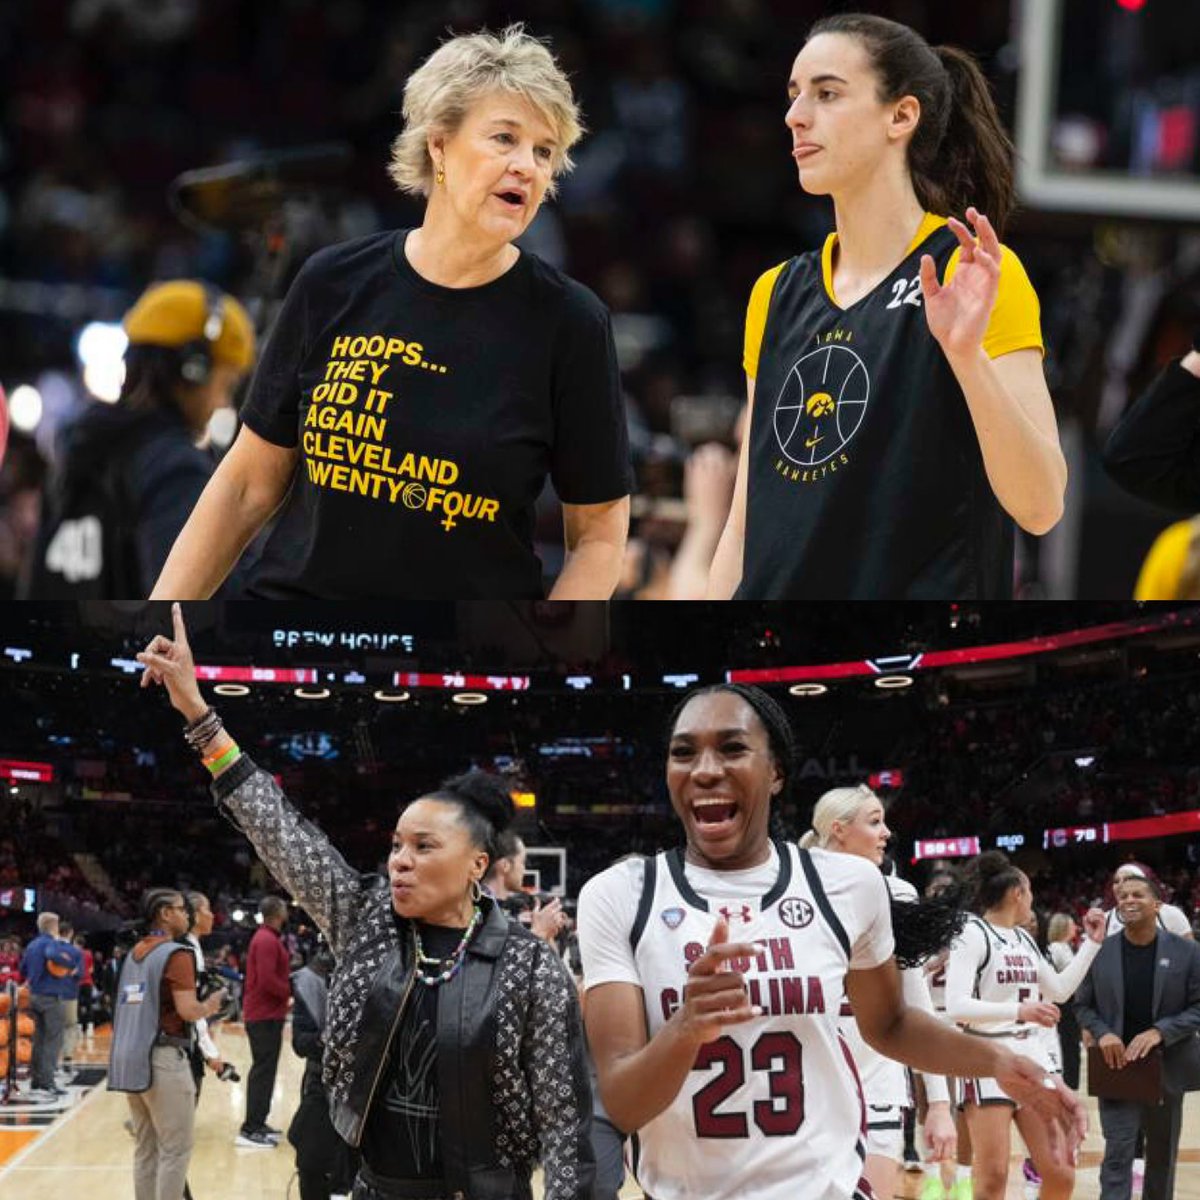 Iowa vs South Carolina 🏀. Caitlin Clark is considered the best player in College Basketball,but she’s going against the best team in College Basketball in the 37-0 South Carolina Gamecocks. Who wins the Women’s National Championship Game y’all? #NCAAFinalFour #AdamsBoxingShow…